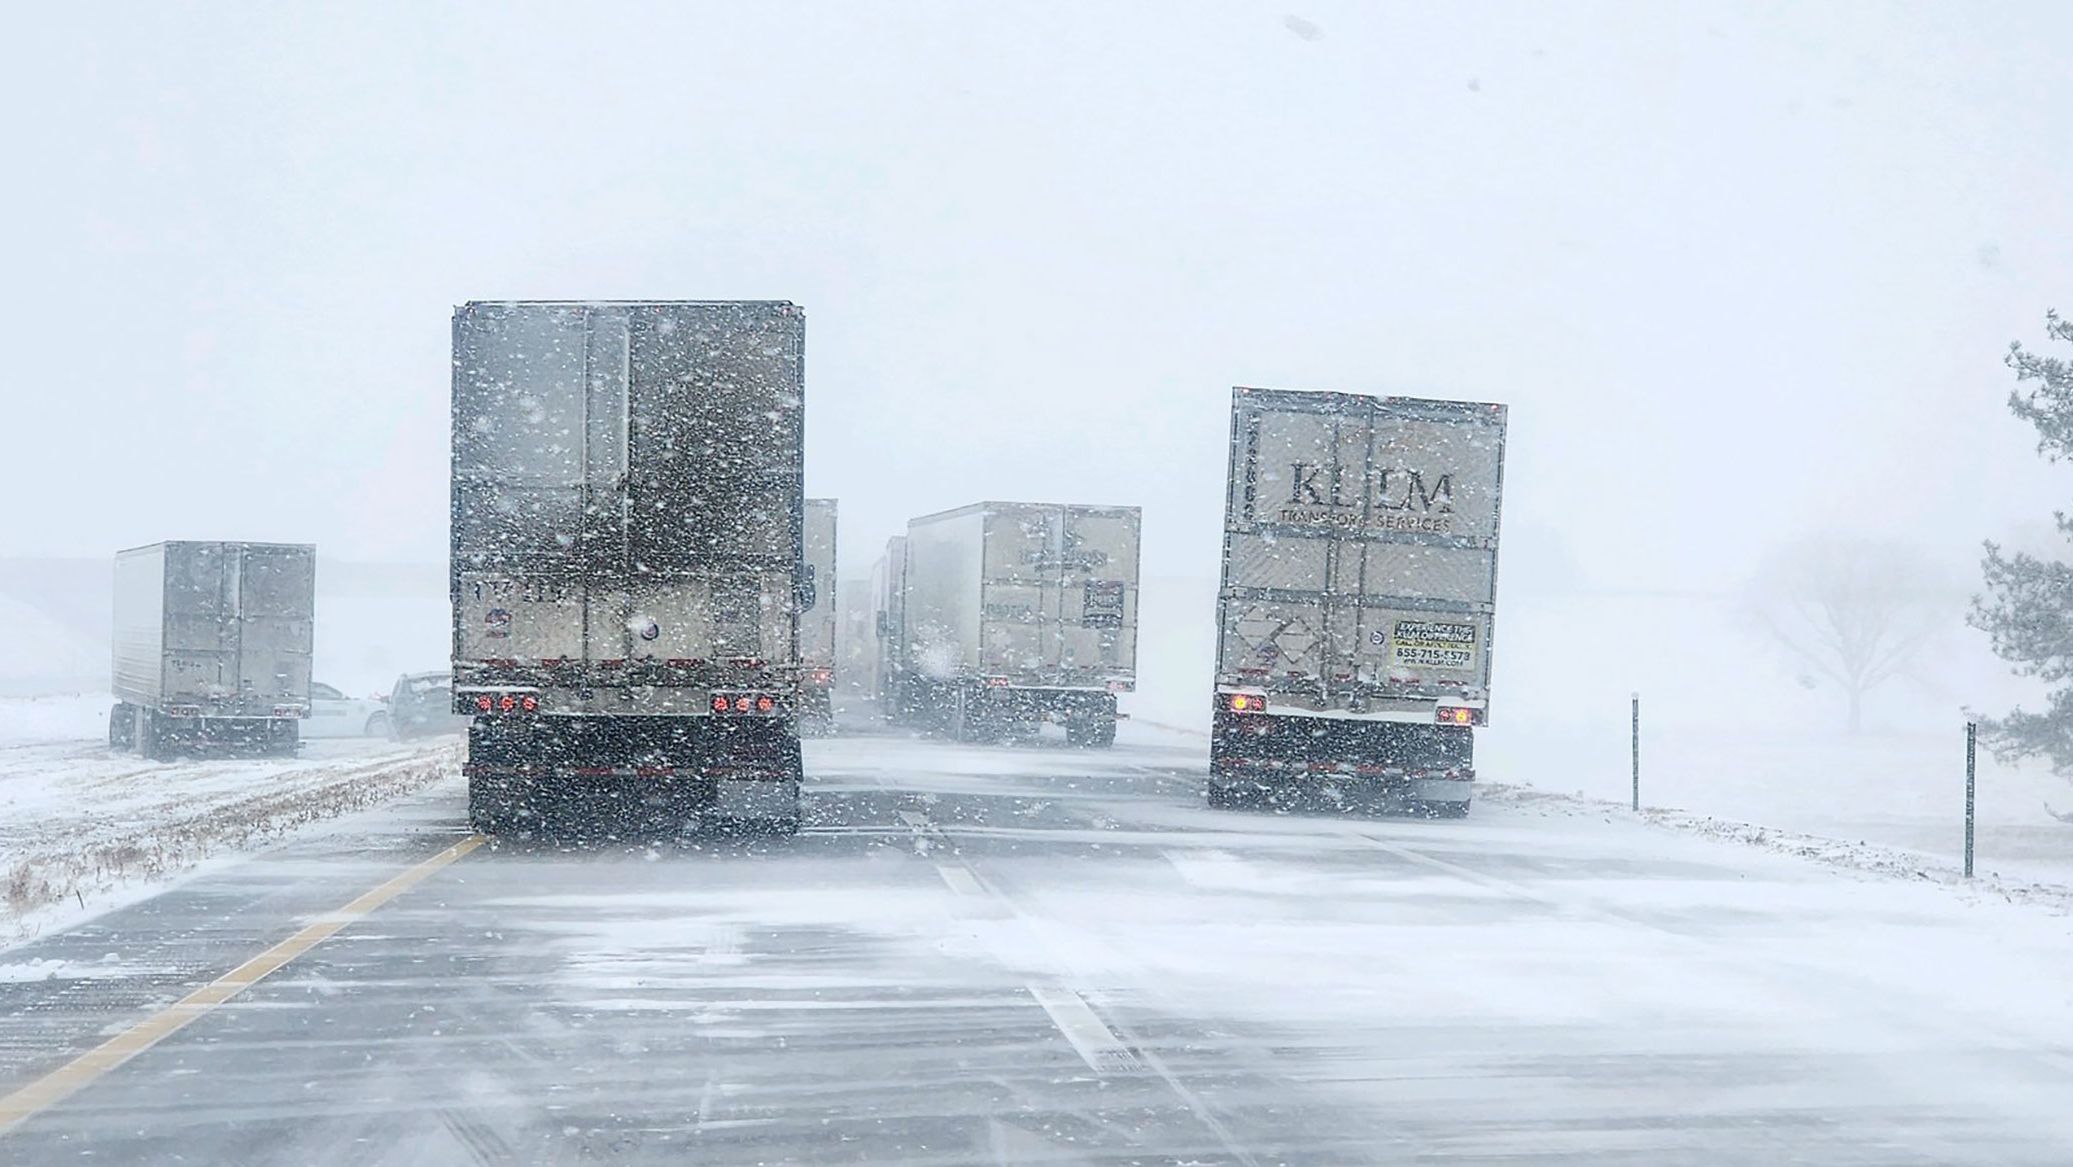 Nebraska State Patrol
@NEStatePatrol
    Eastbound I-80 is CLOSED at York due to multiple jack-knifed semis at mile marker 353. 

Travel is not advised during blizzard conditions. Check http://511.Nebraska.gov for updates on any other closures that may become necessary.